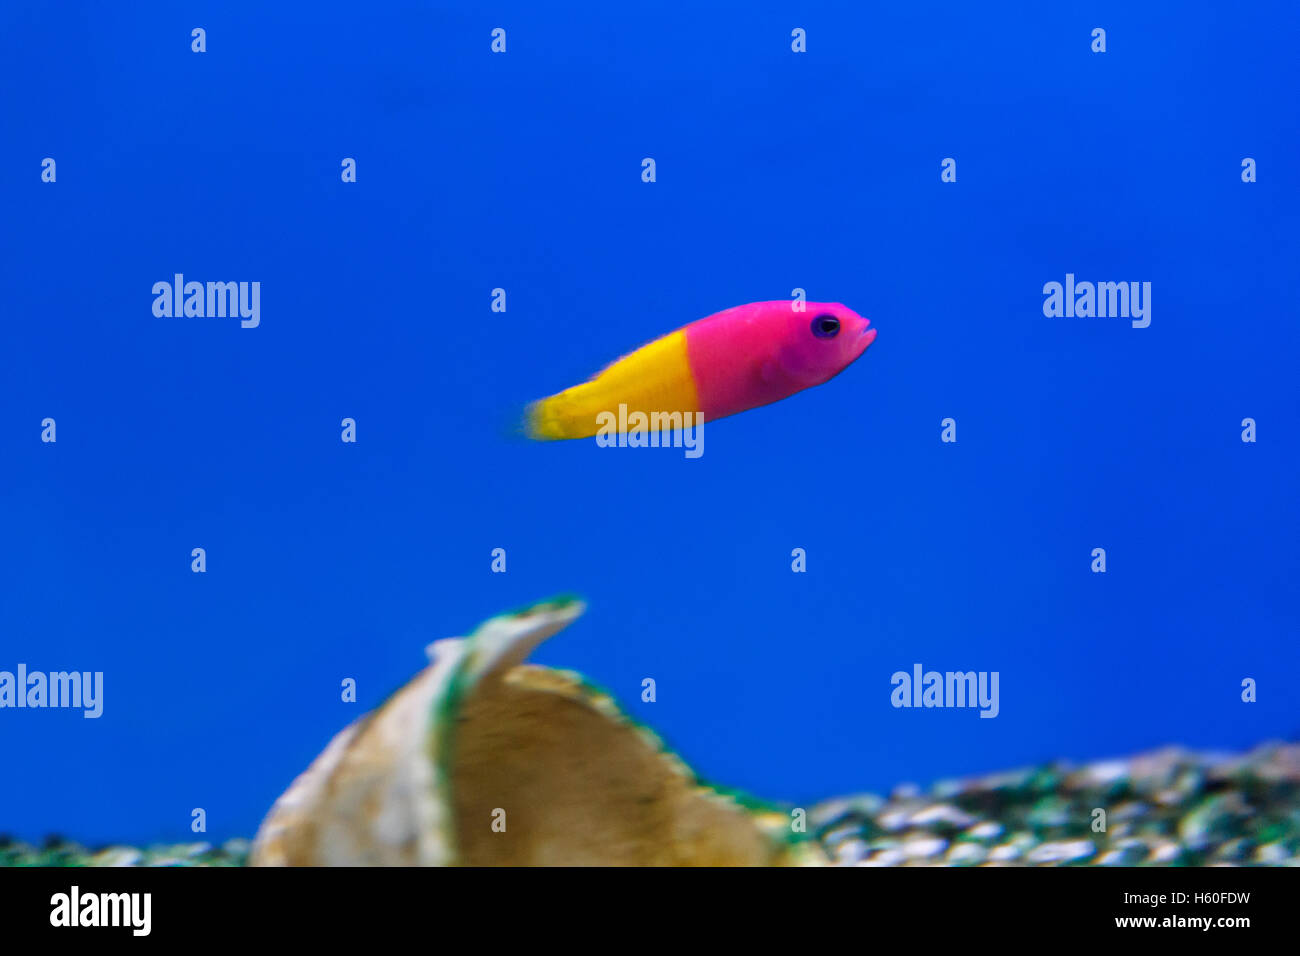 One small pseudochromis fish with vivid colors swimming in aquarium Stock Photo